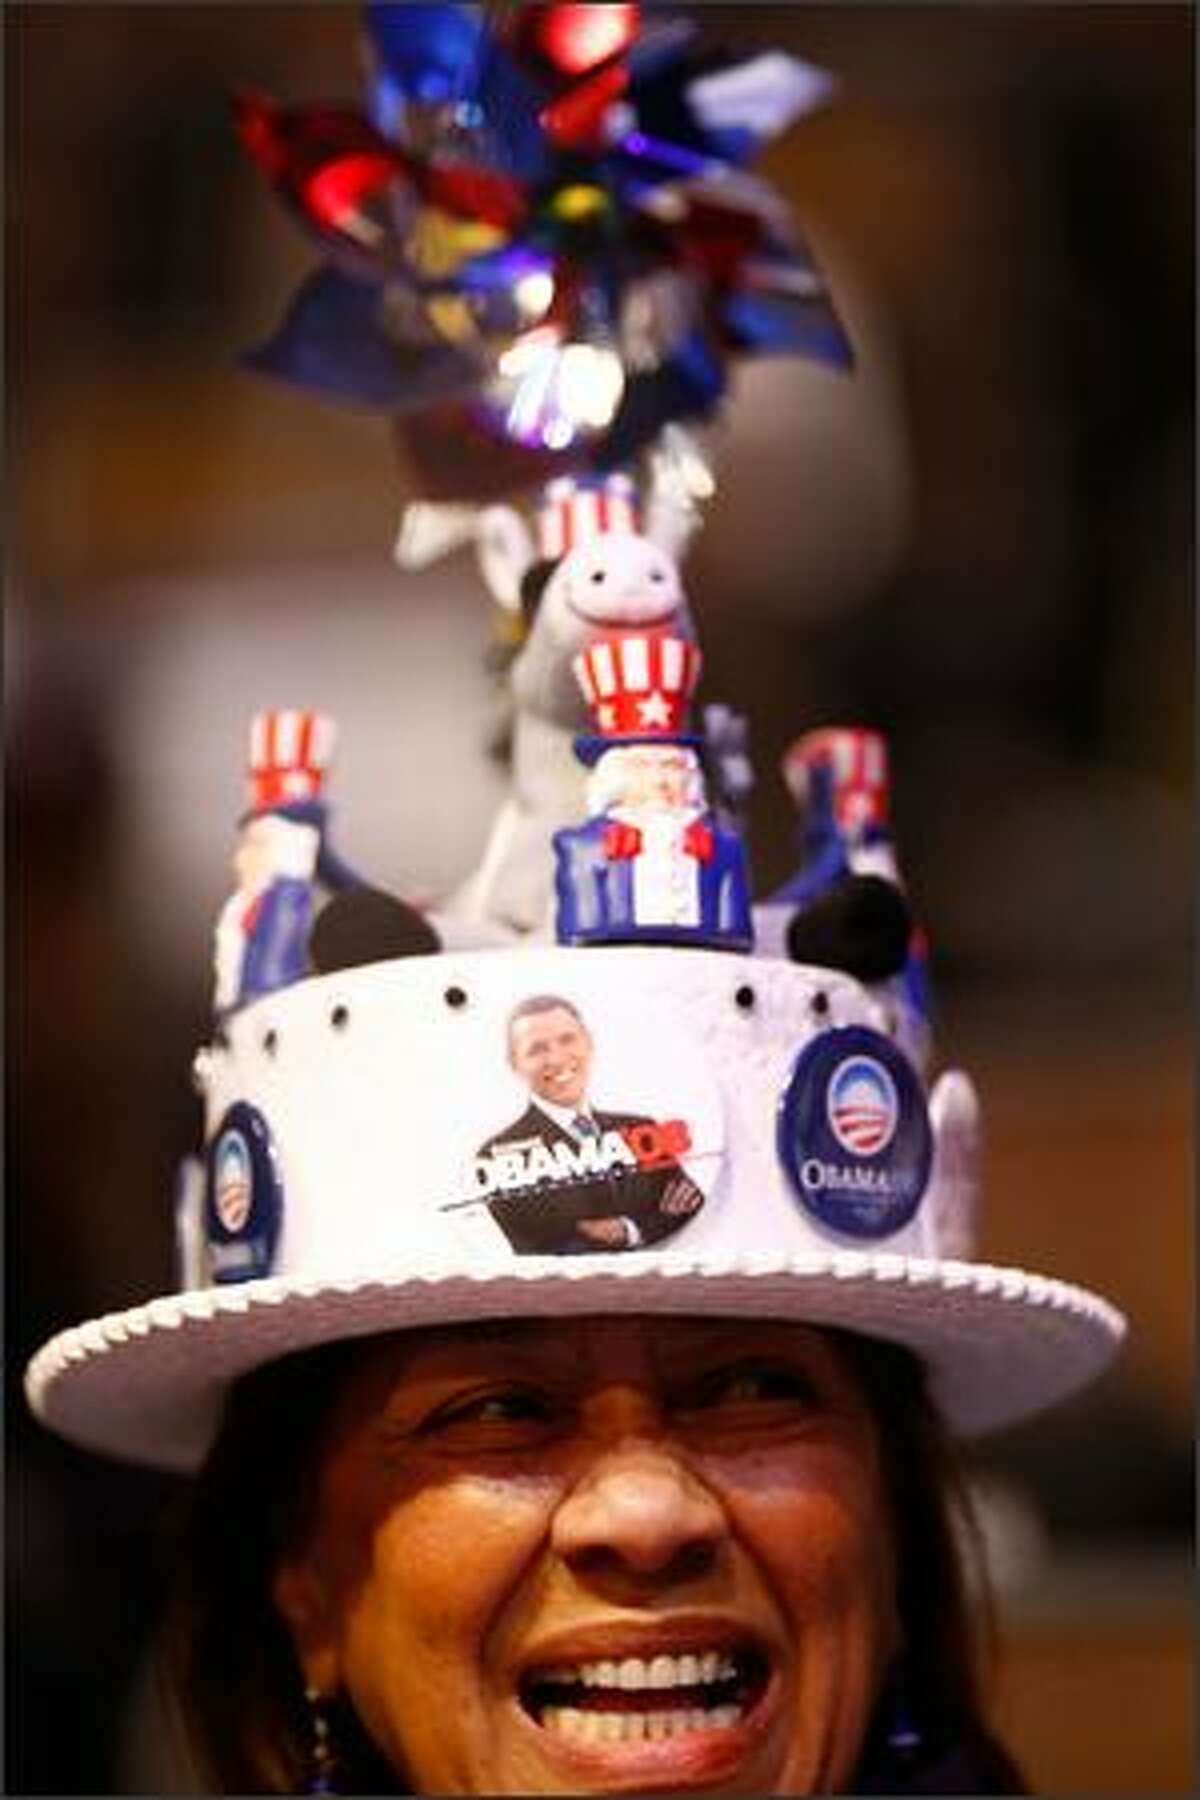 A women smiles while wearing a hat during day one of the Democratic National Convention (DNC) at the Pepsi Center on Monday in Denver, Colorado.